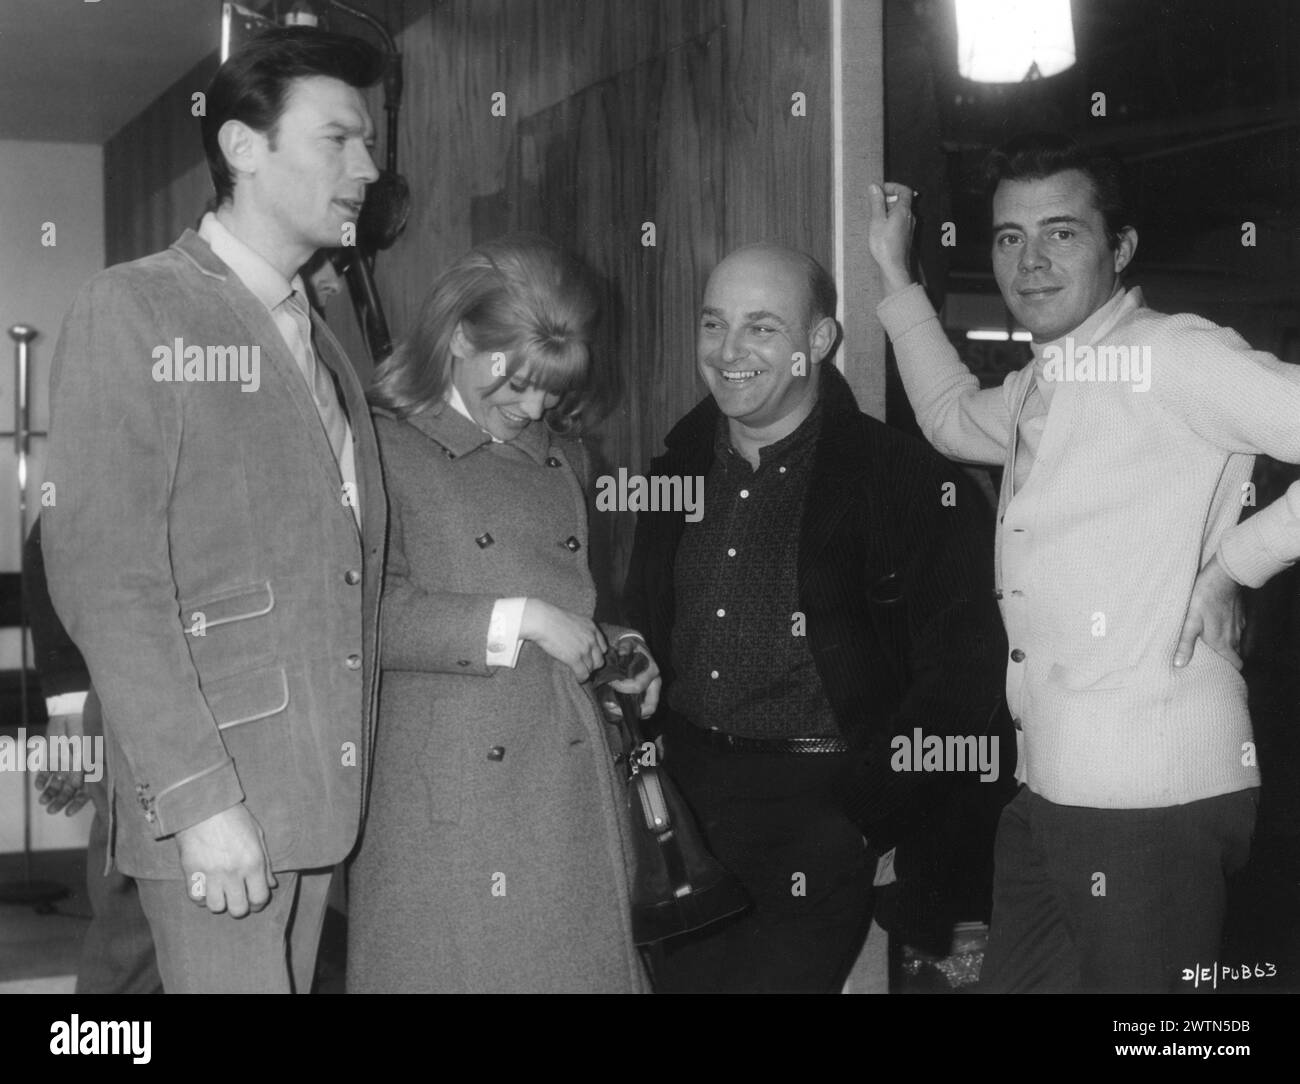 A candid photo of British Actress JULIE CHRISTIE with LAURENCE HARVEY, JOHN SCHLESINGER and DIRK BOGARDE on the set of DARLING 1965  Director JOHN SCHLESINGER  Screenplay FREDERIC RAPHAEL Costume Design JULIE HARRIS Music JOHN DANKWORTH Vic-Appia Films / Anglo Amalgamated Stock Photo